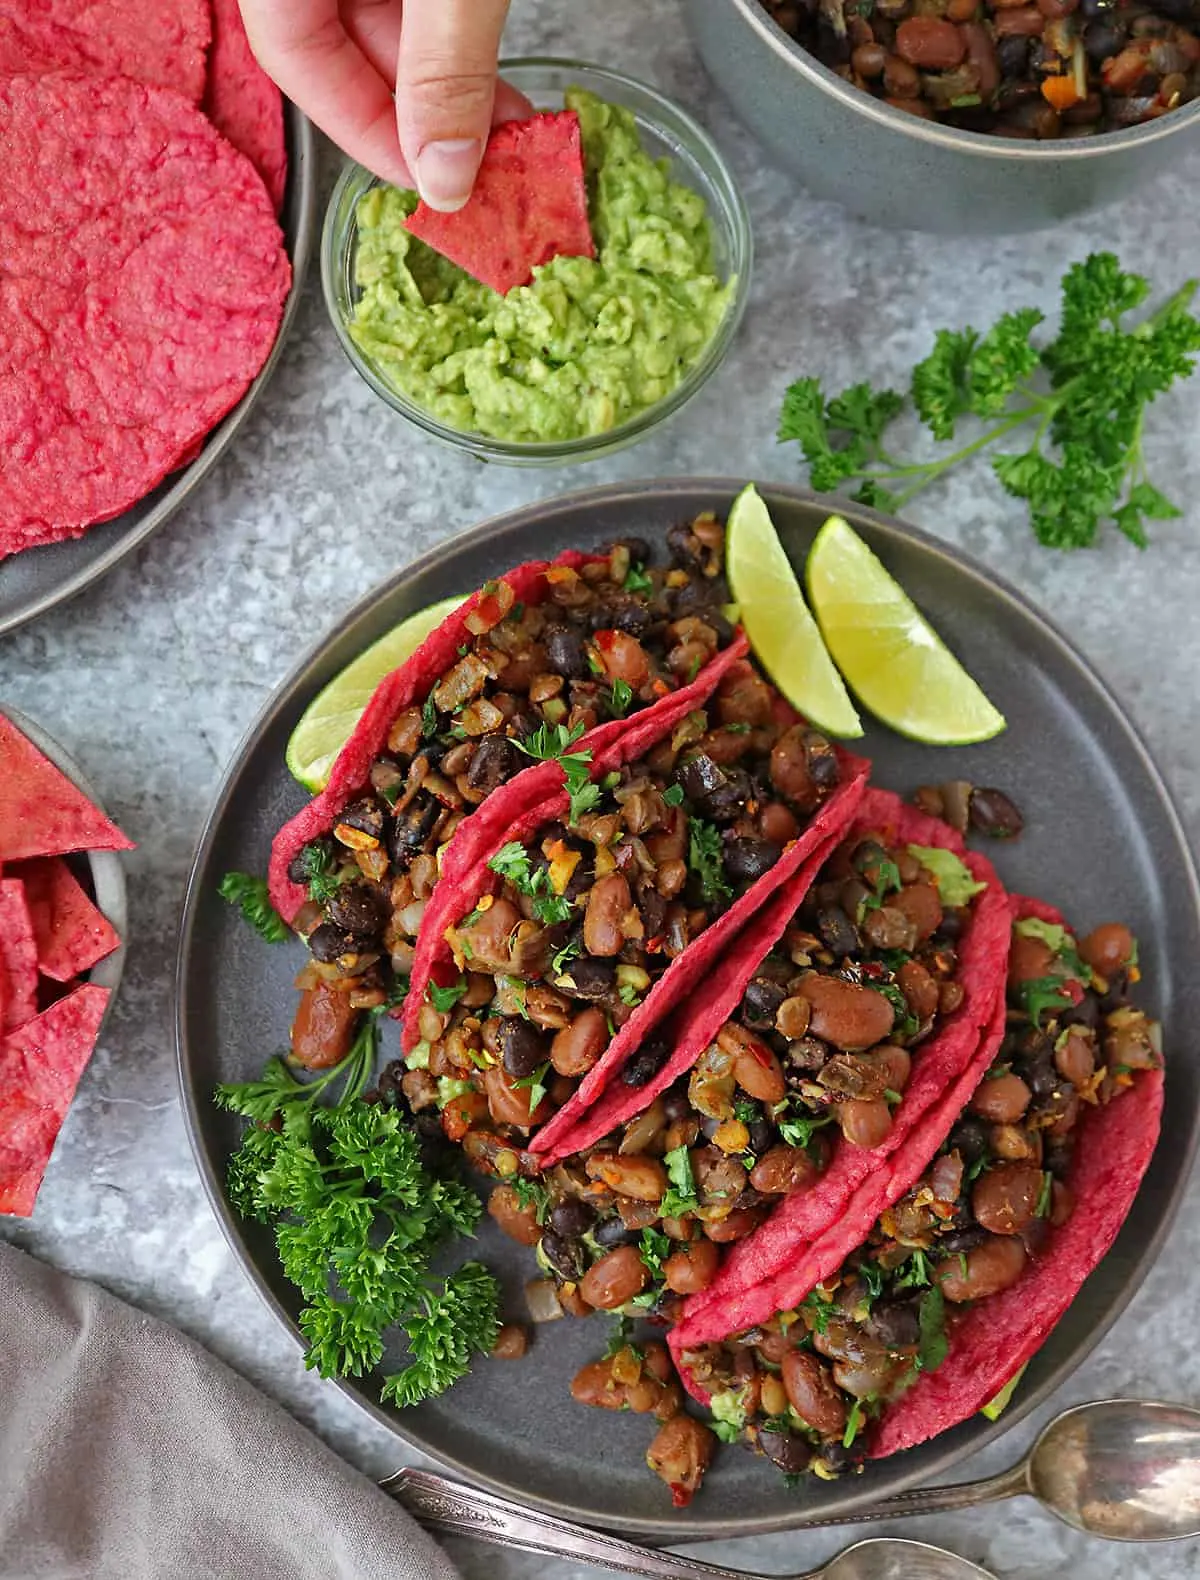 Beetroot Tortillas With Bean Filling For Dinner